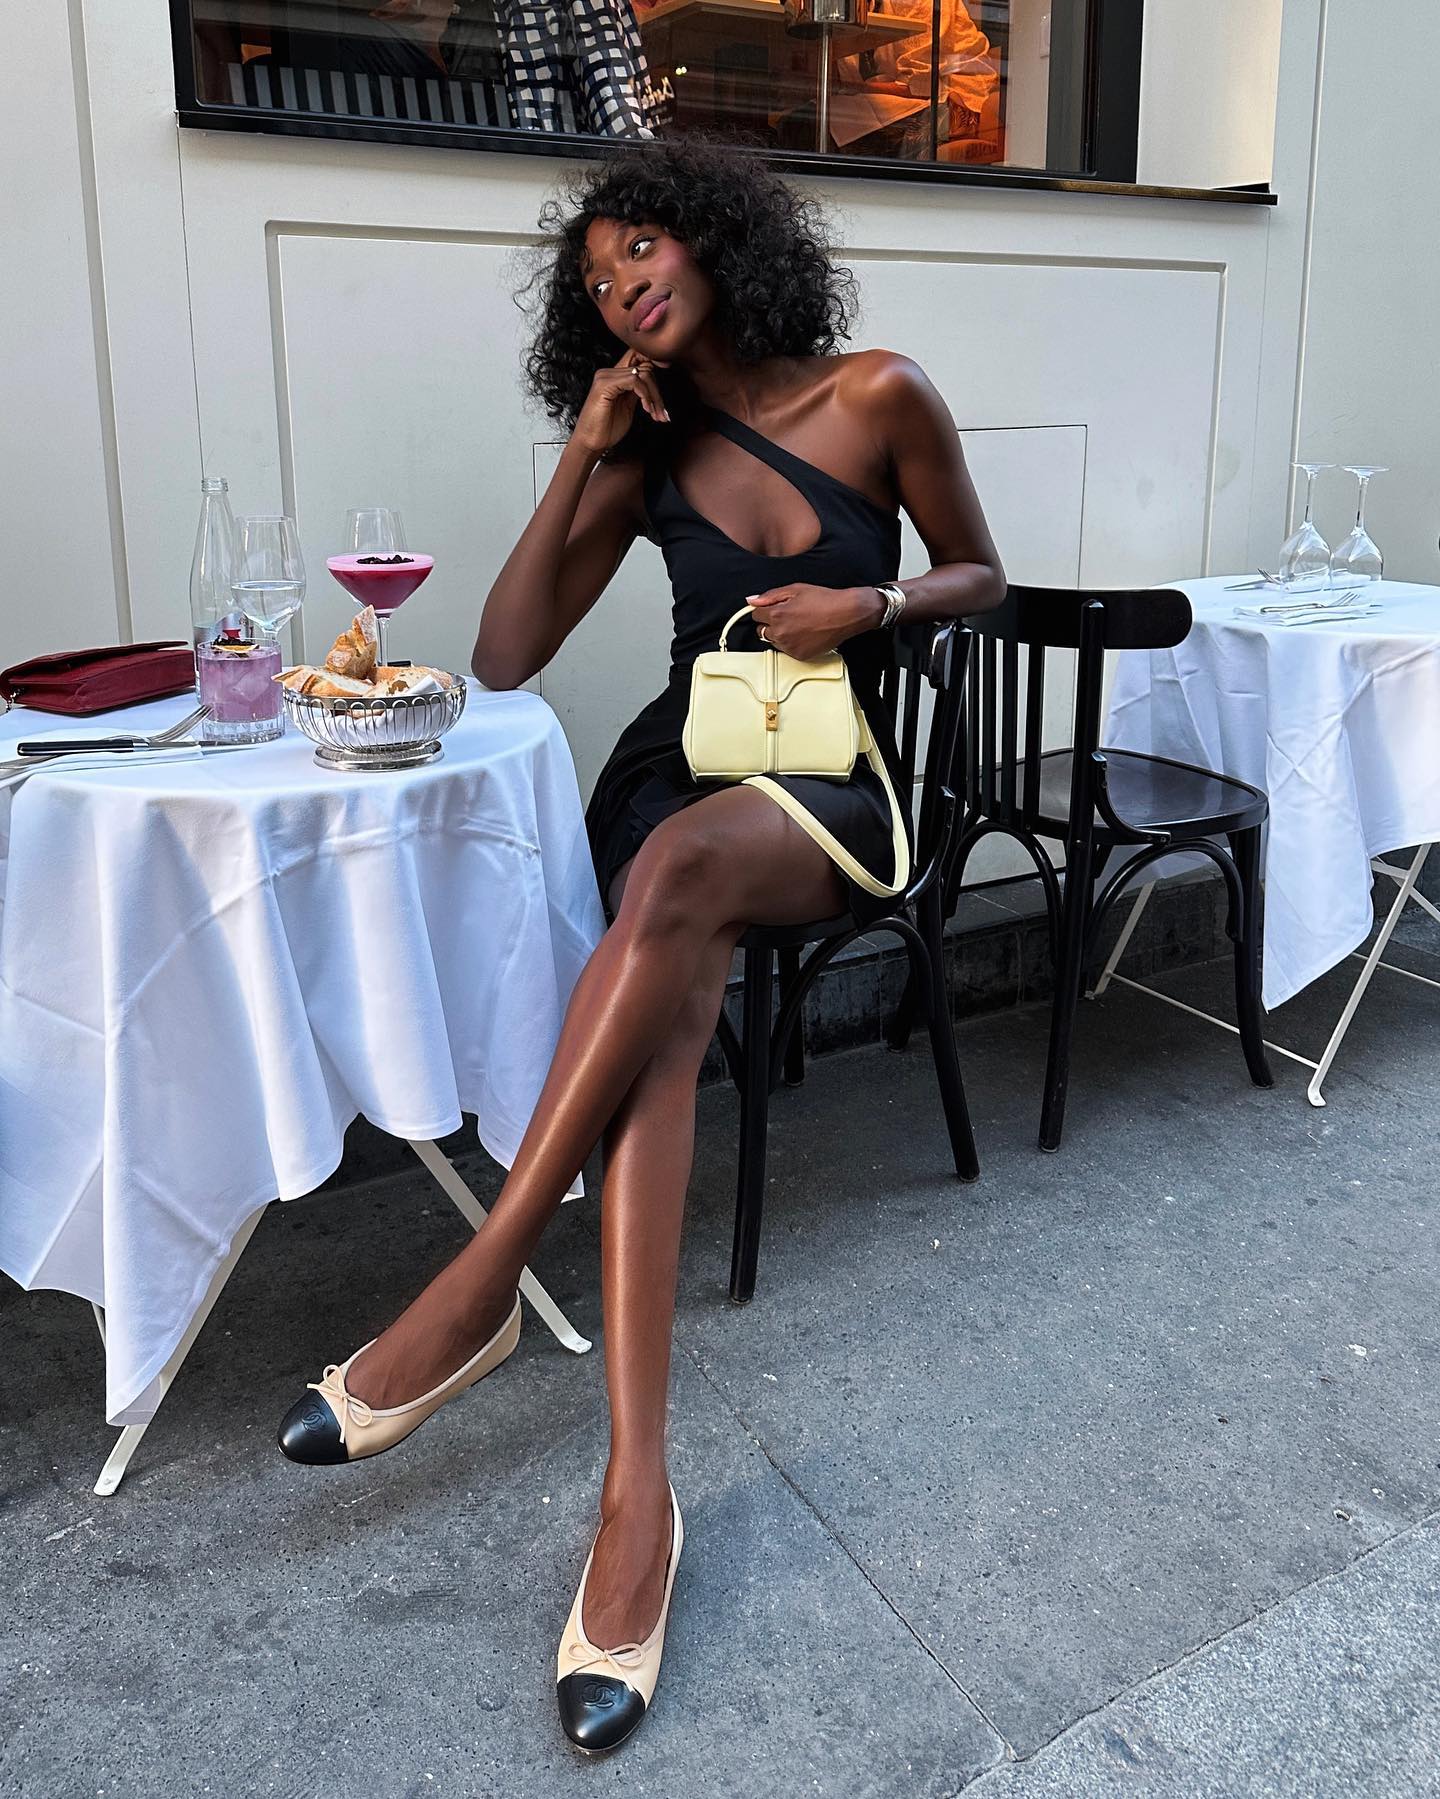 Emmanuelle Koffi siting outside at cafe table holding yellow purse wearing black dress and chanel ballet flats